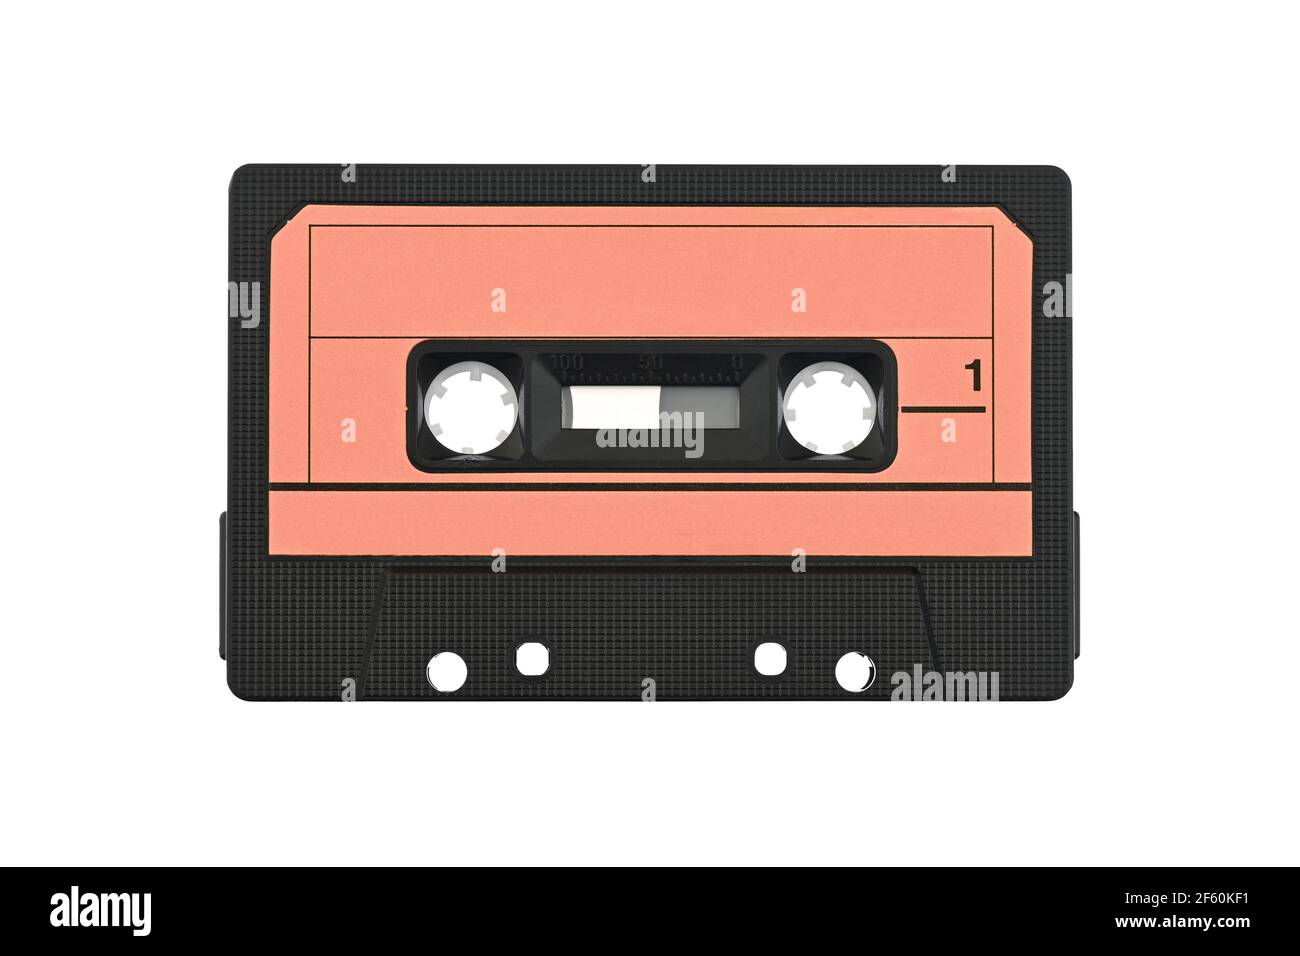 Cassette tape isolated on white. Vintage audio cassette, retro red coloring. Stock Photo